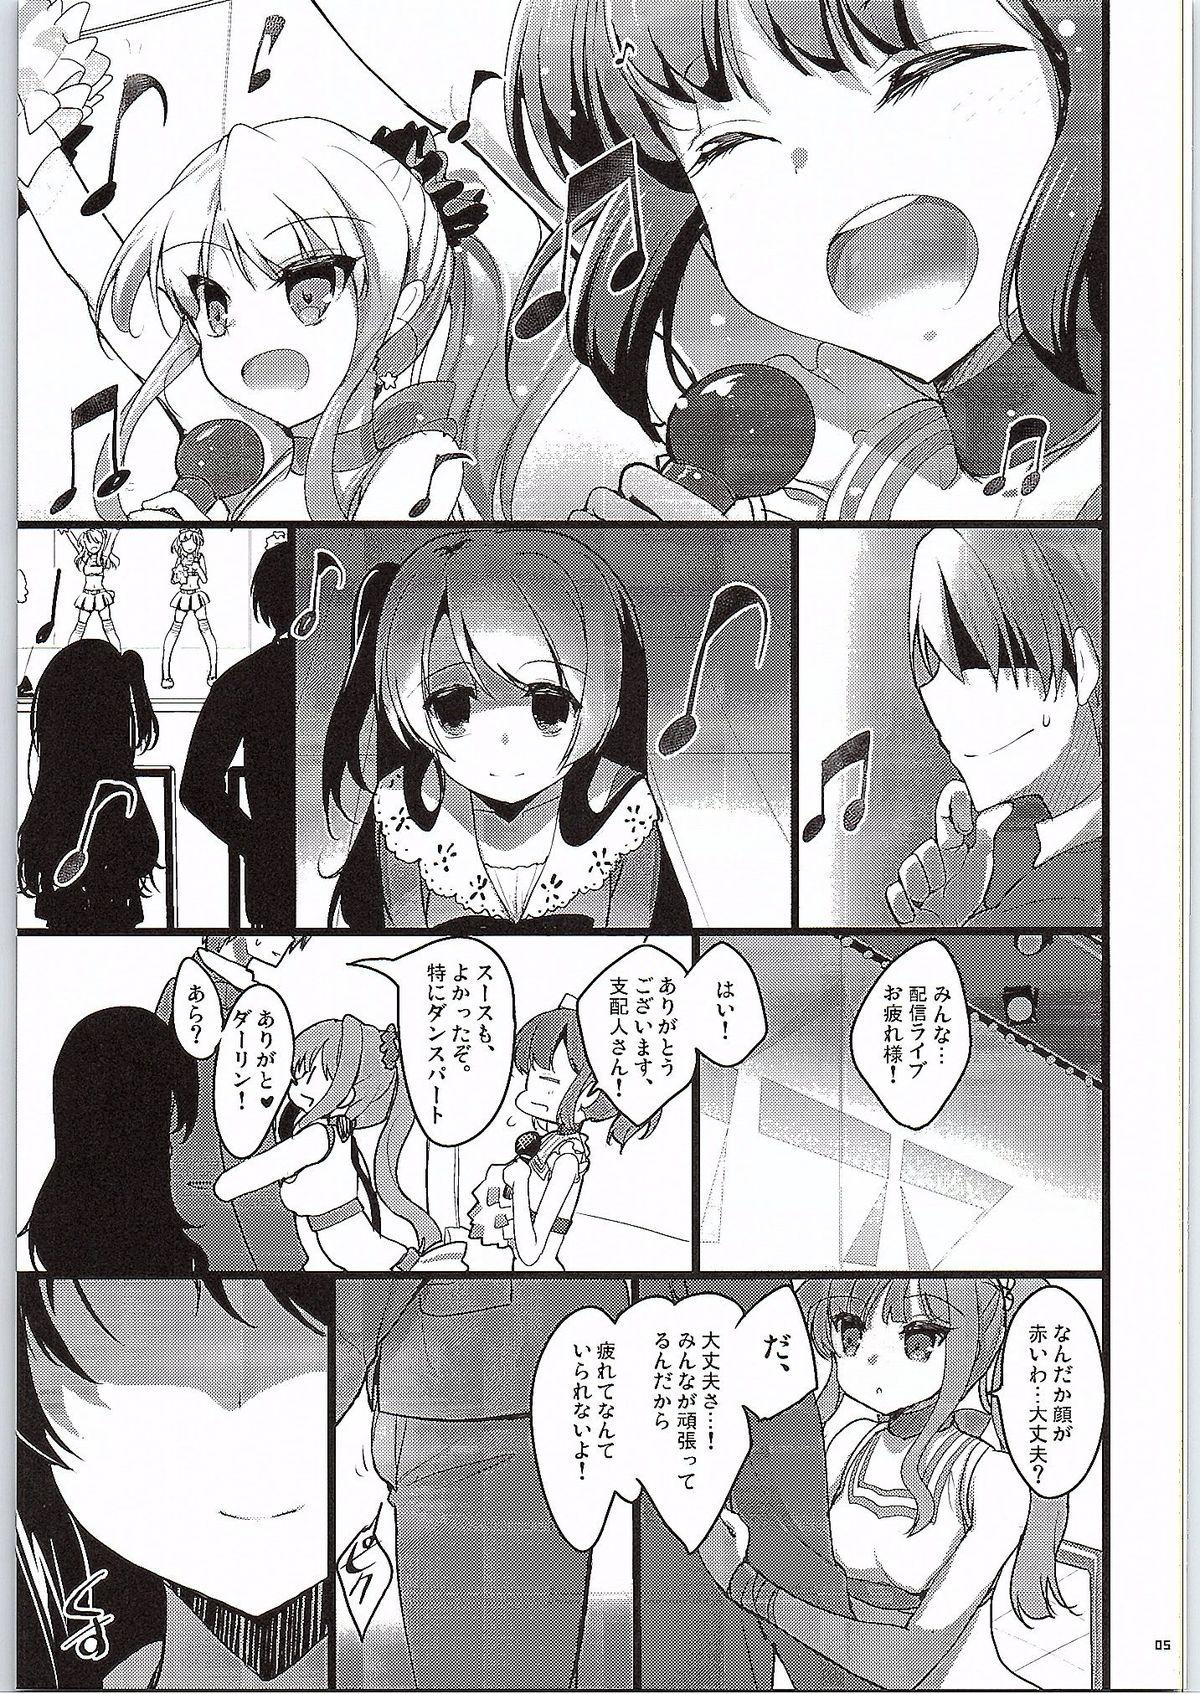 Private Sex GOOD NIGHTMARE - Tokyo 7th sisters Amadora - Page 4